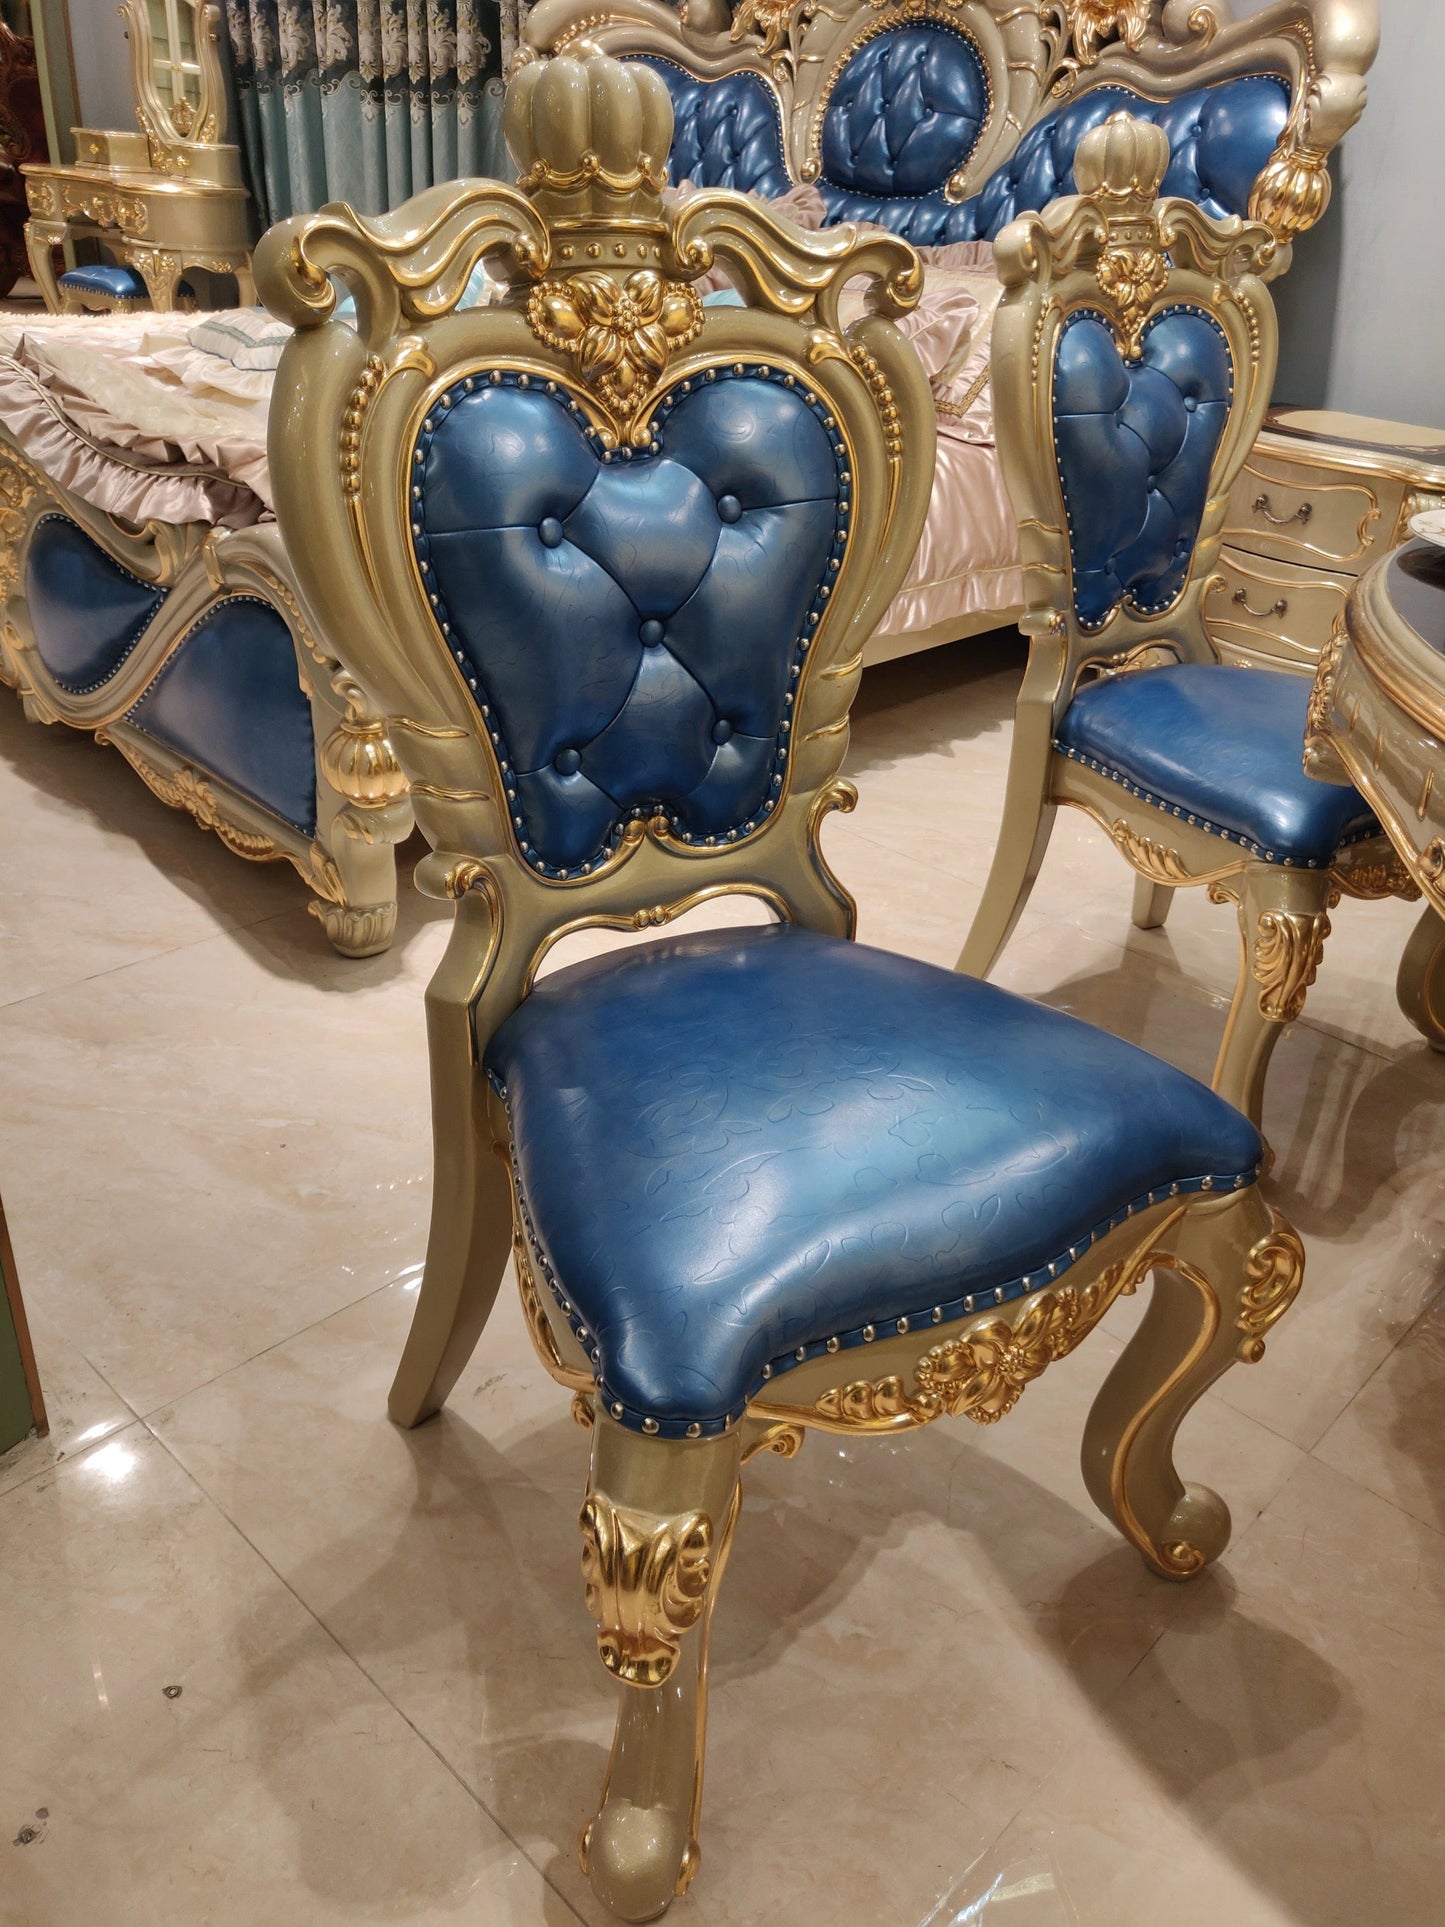 Dining Chairs Golden Foil Hand Carved Italian Baroque Design Dining Room Furniture